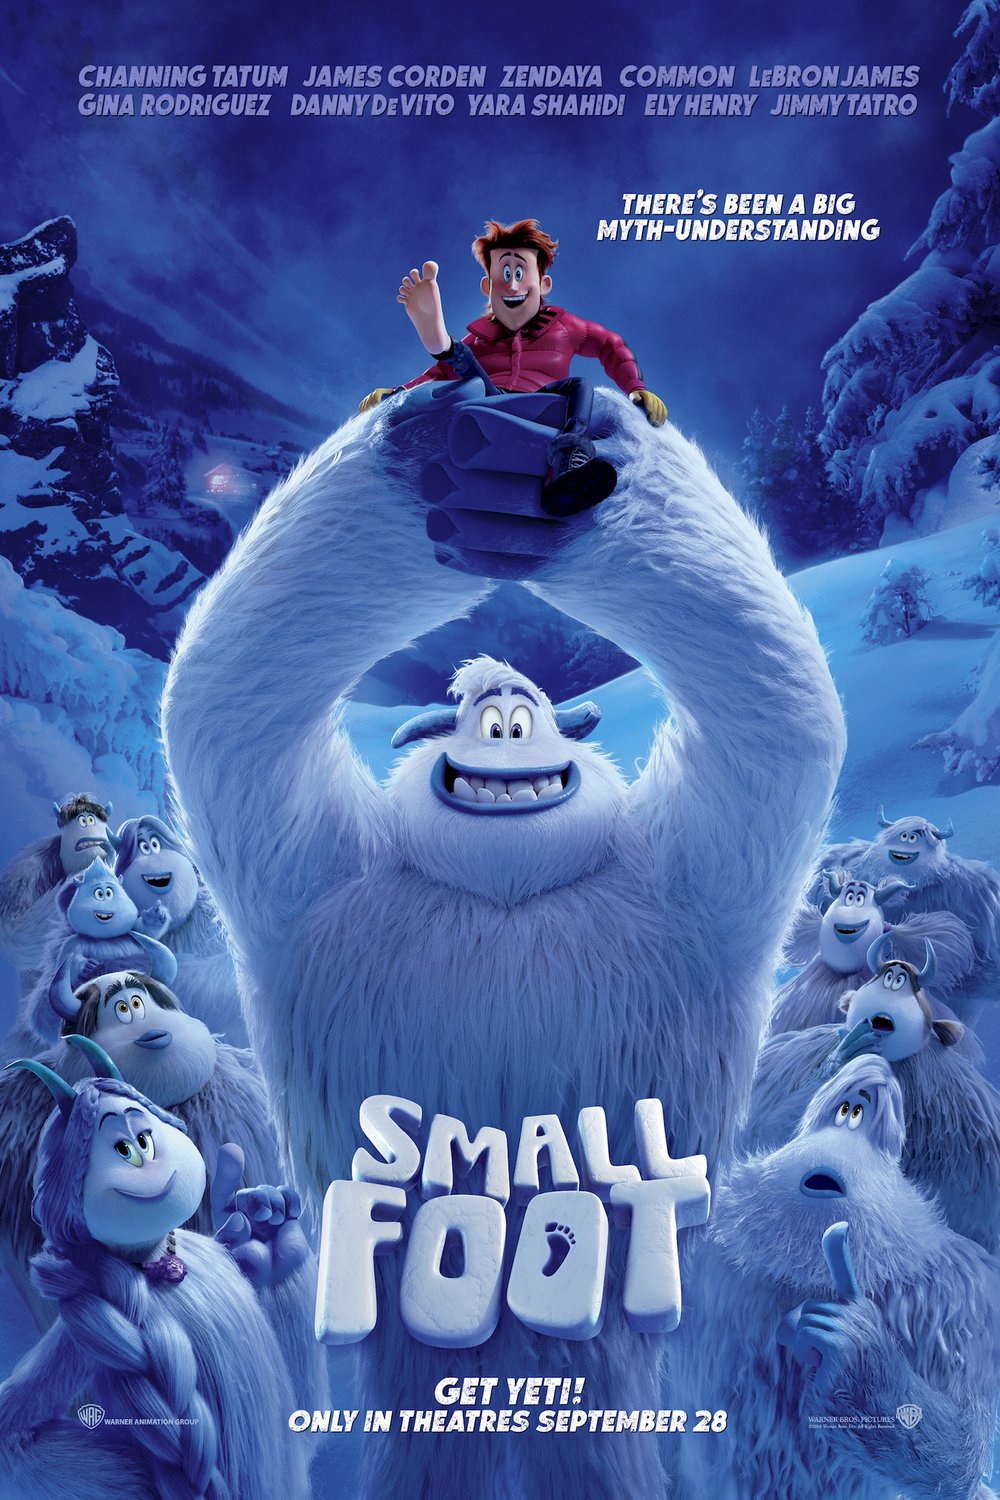 Poster of the movie Smallfoot